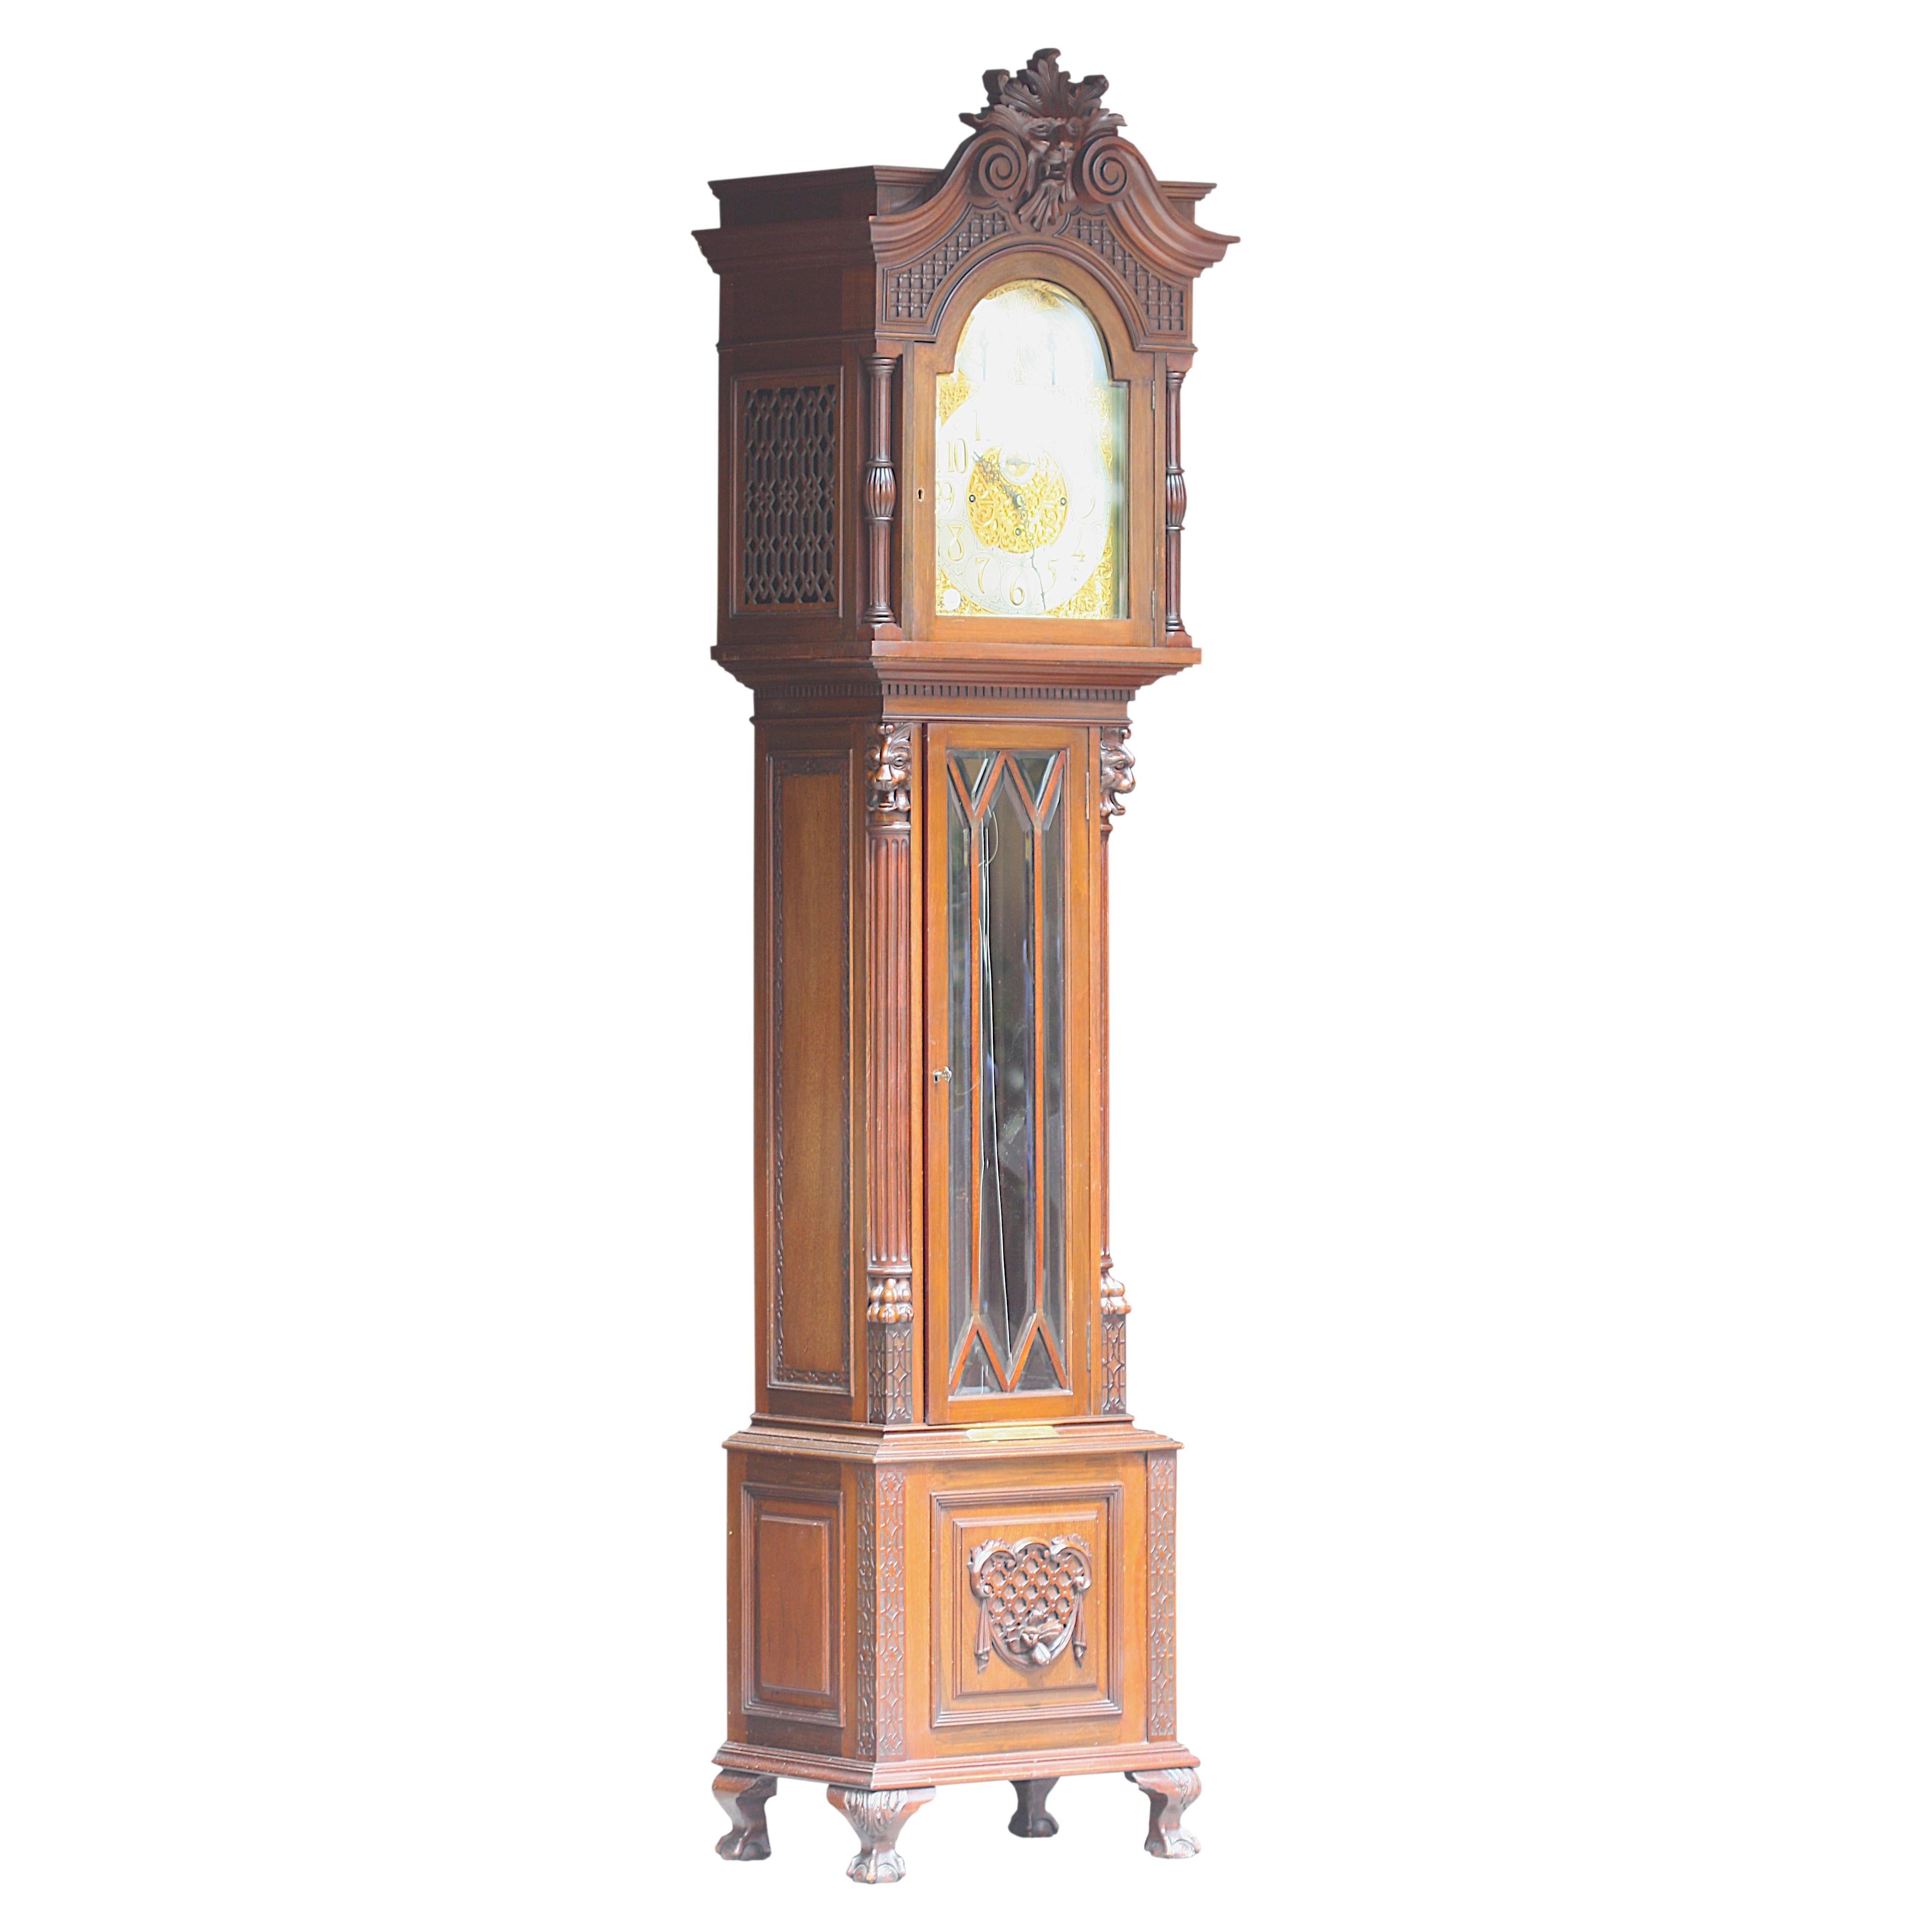 Fine English Renaissance Revival Mahogany Chiming Tall Case Clock.
Circa 1890, Russells Ltd. 
The three-train movement with an arched brass plate, mounted with allover cut-out and raised foliate scrolls, fitted with a Westminster and Whittingham